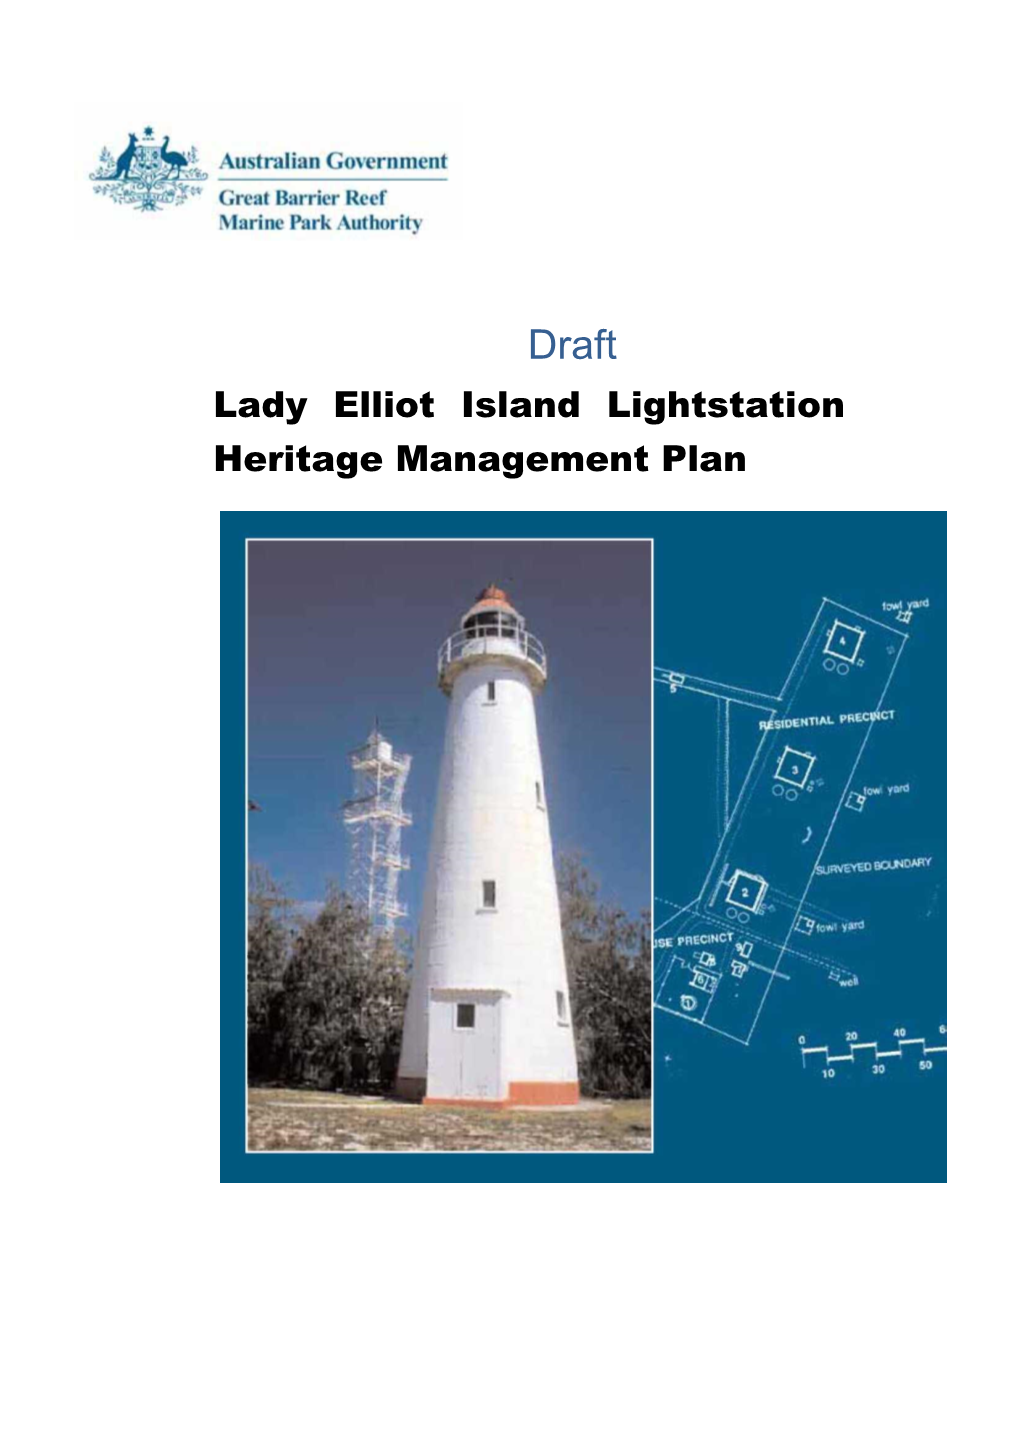 Lady Elliot Lightstation for Example, Works and Development to the Resort Or Airfield Could Have Impacts on the Aesthetic Values of the Place